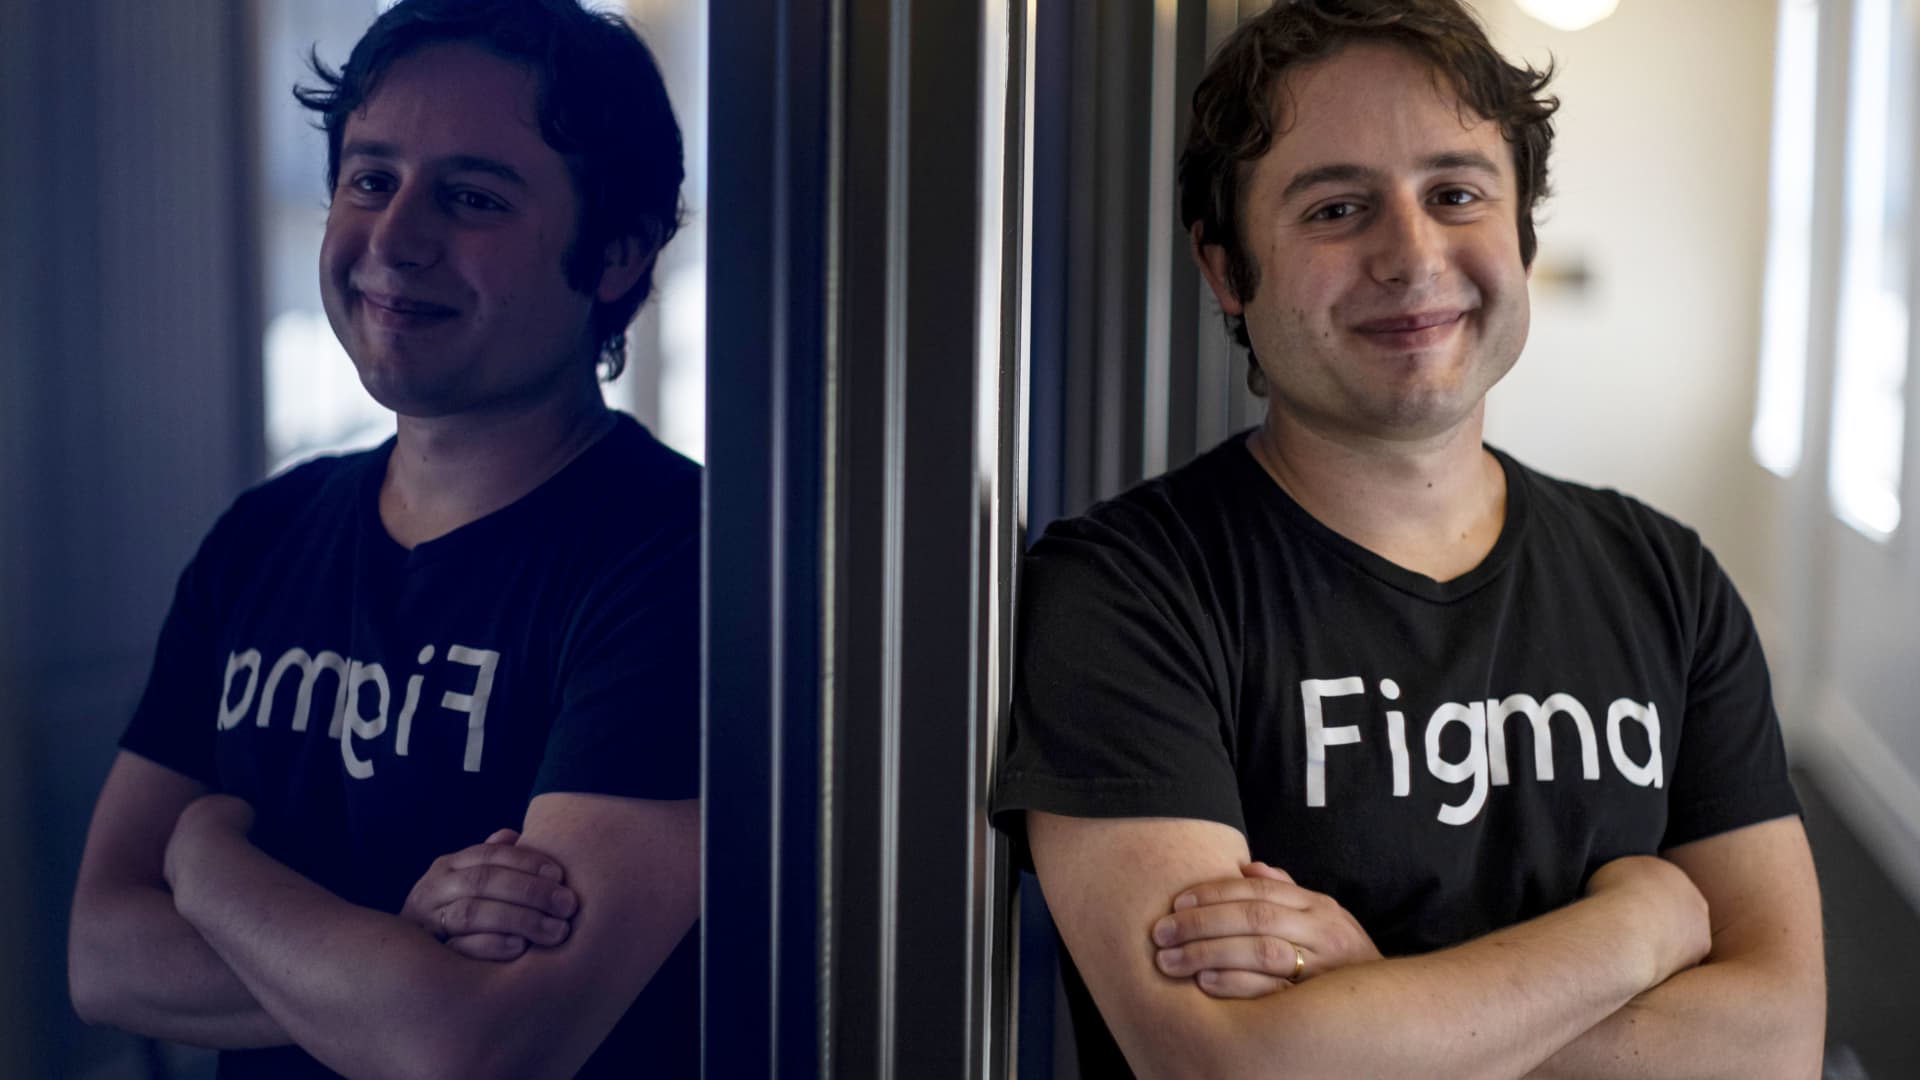 $20 billion Figma deal is a historic coup for startup investors in an otherwise ..